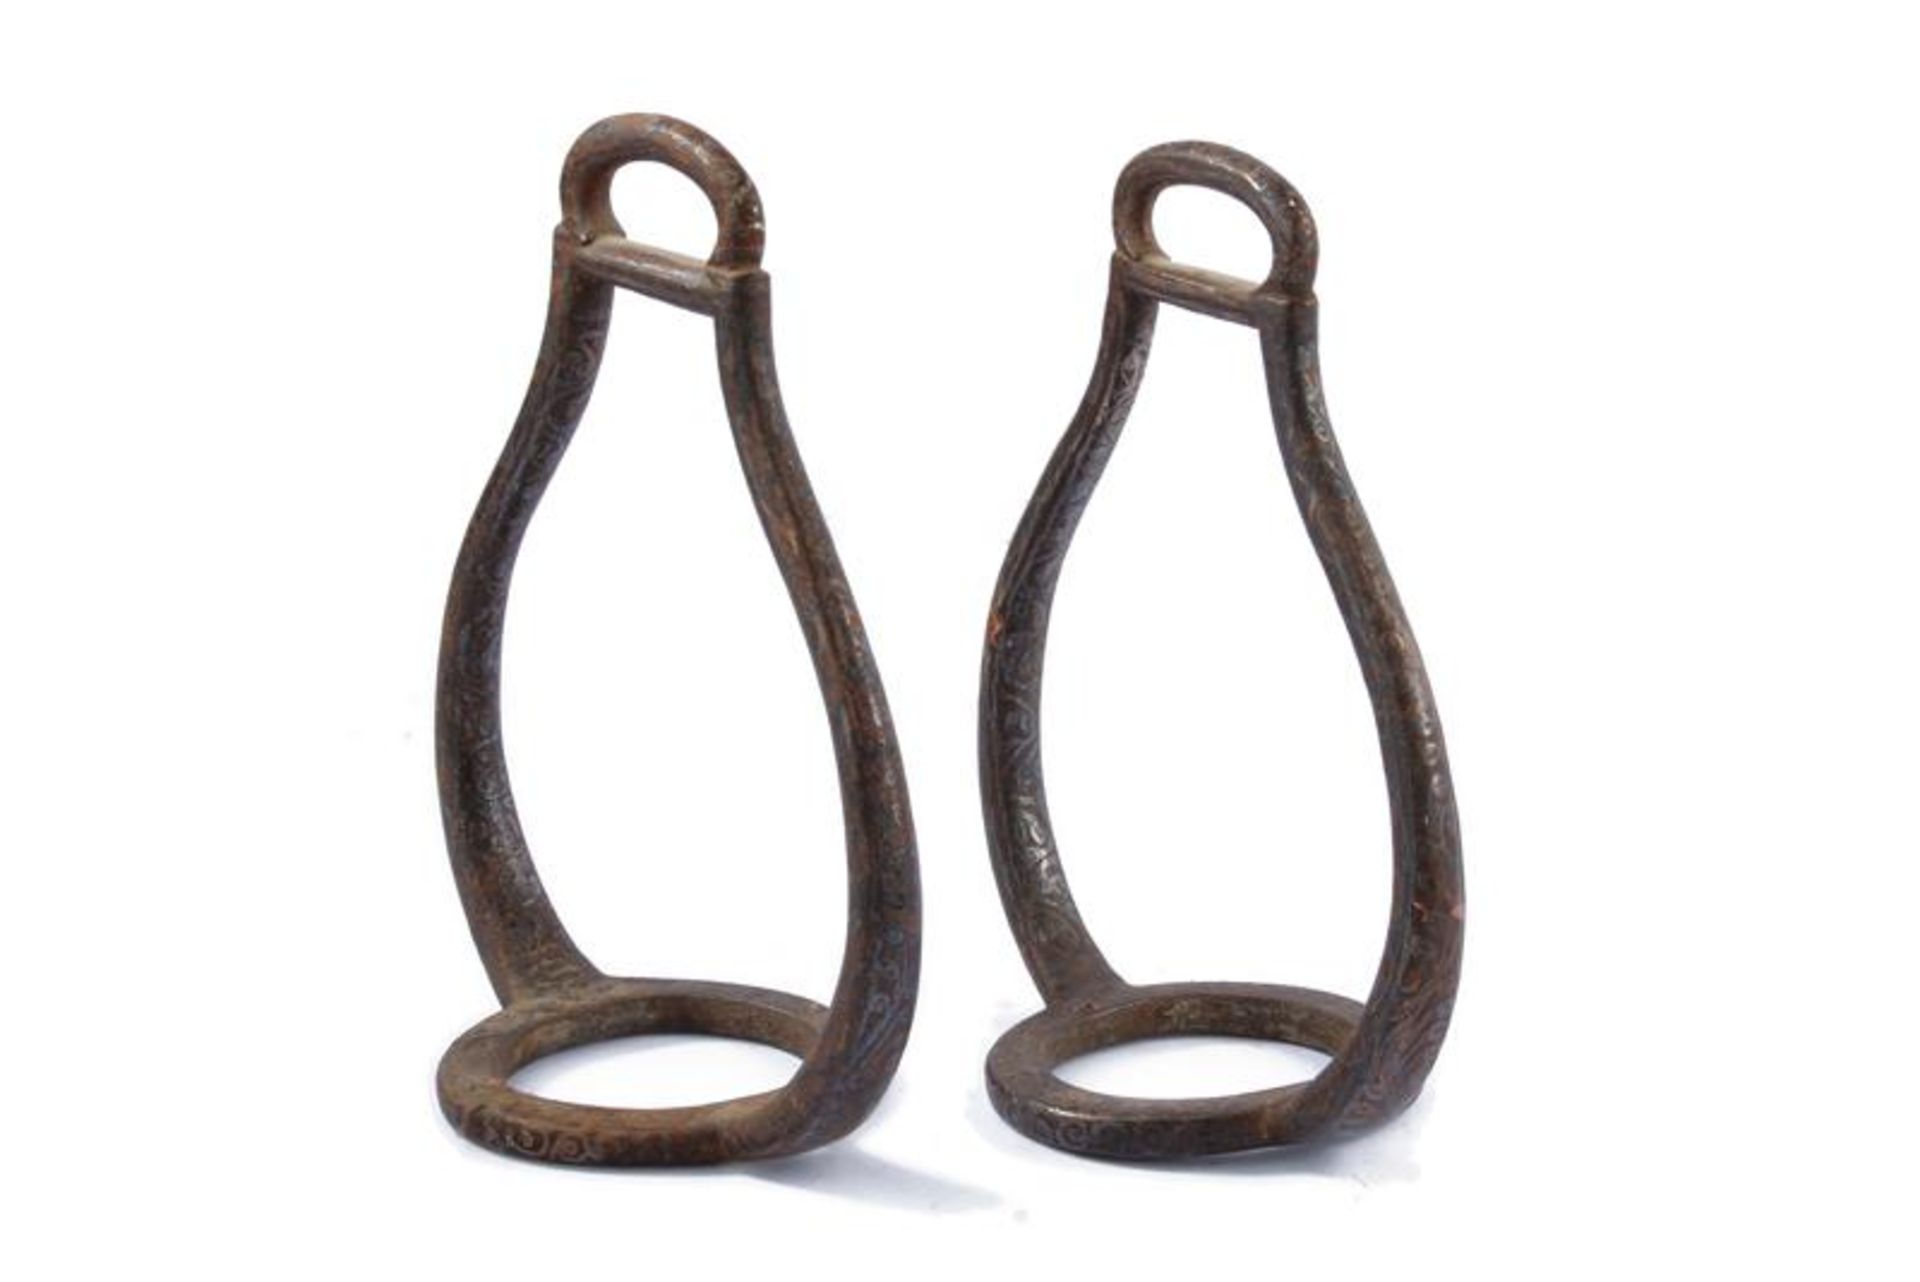 A pair of silver decorated stirrups